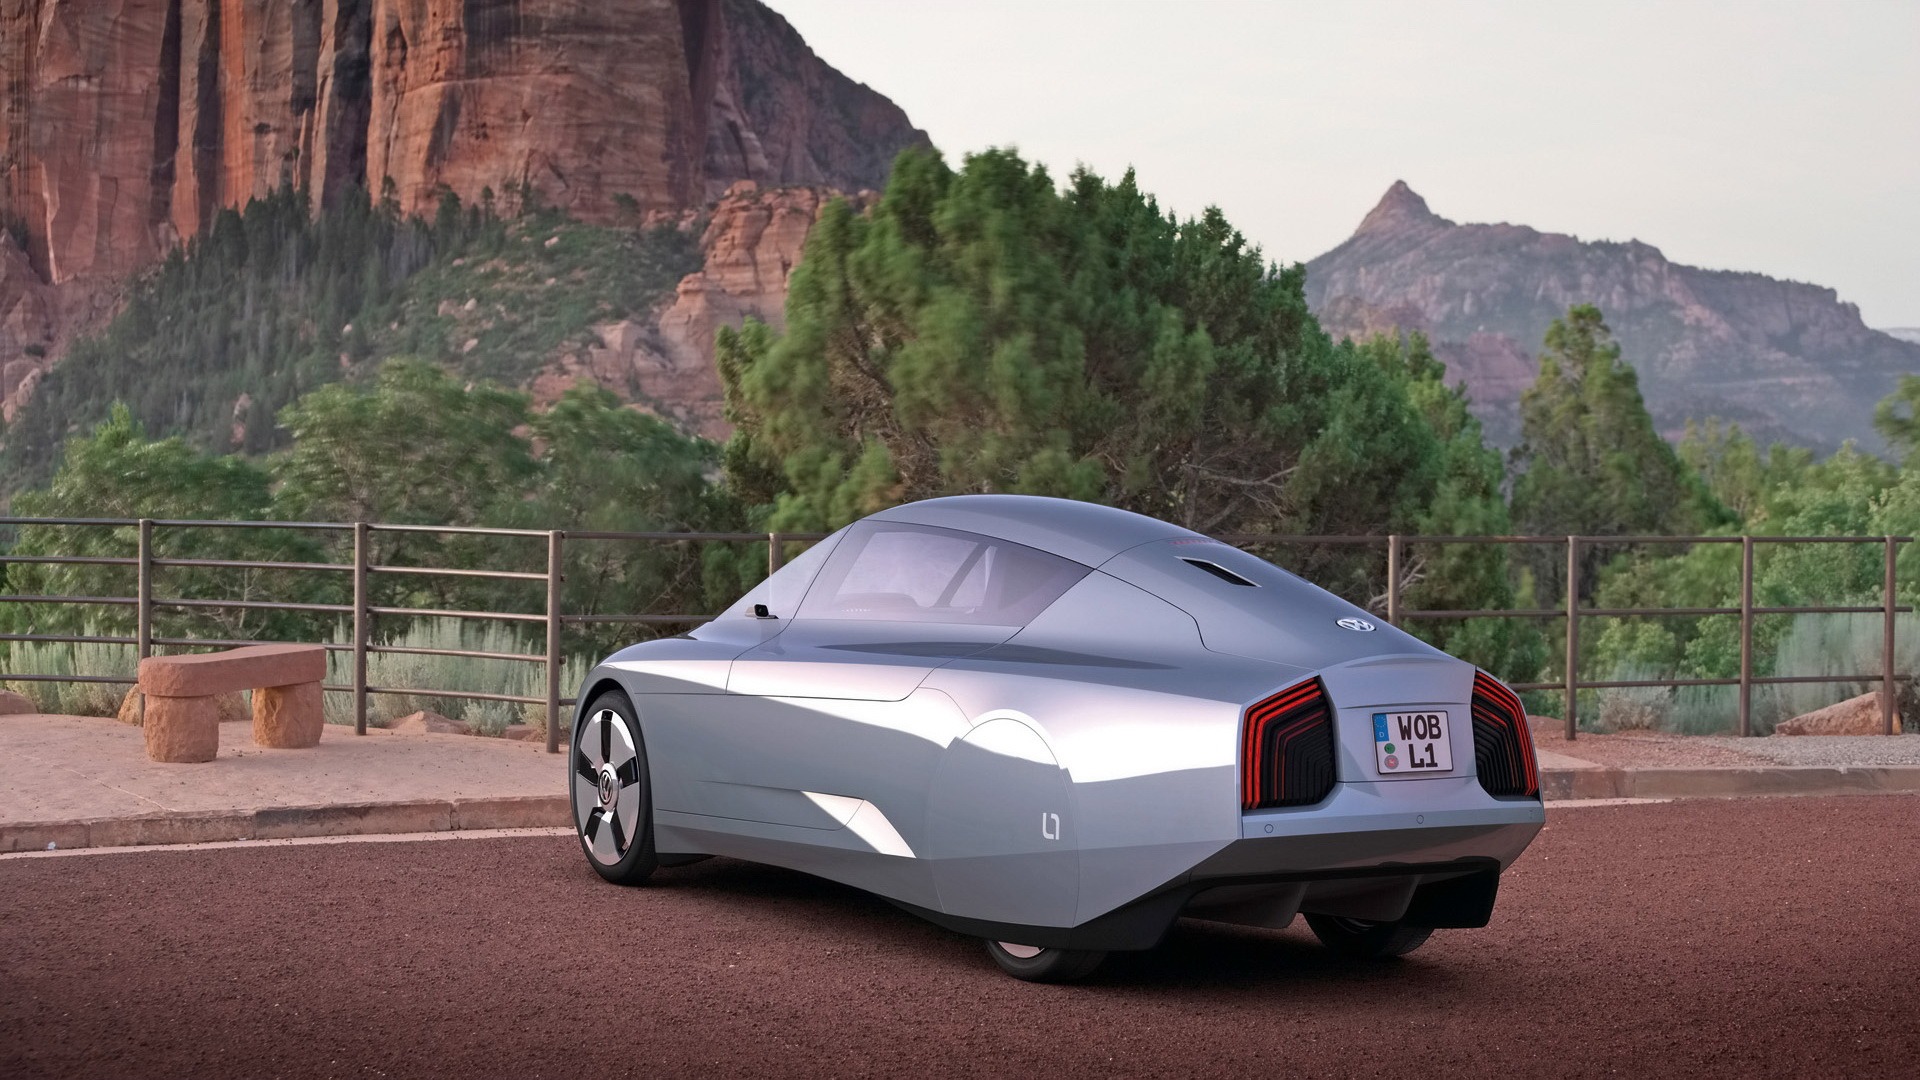 Volkswagen L1 Tapety Concept Car #12 - 1920x1080